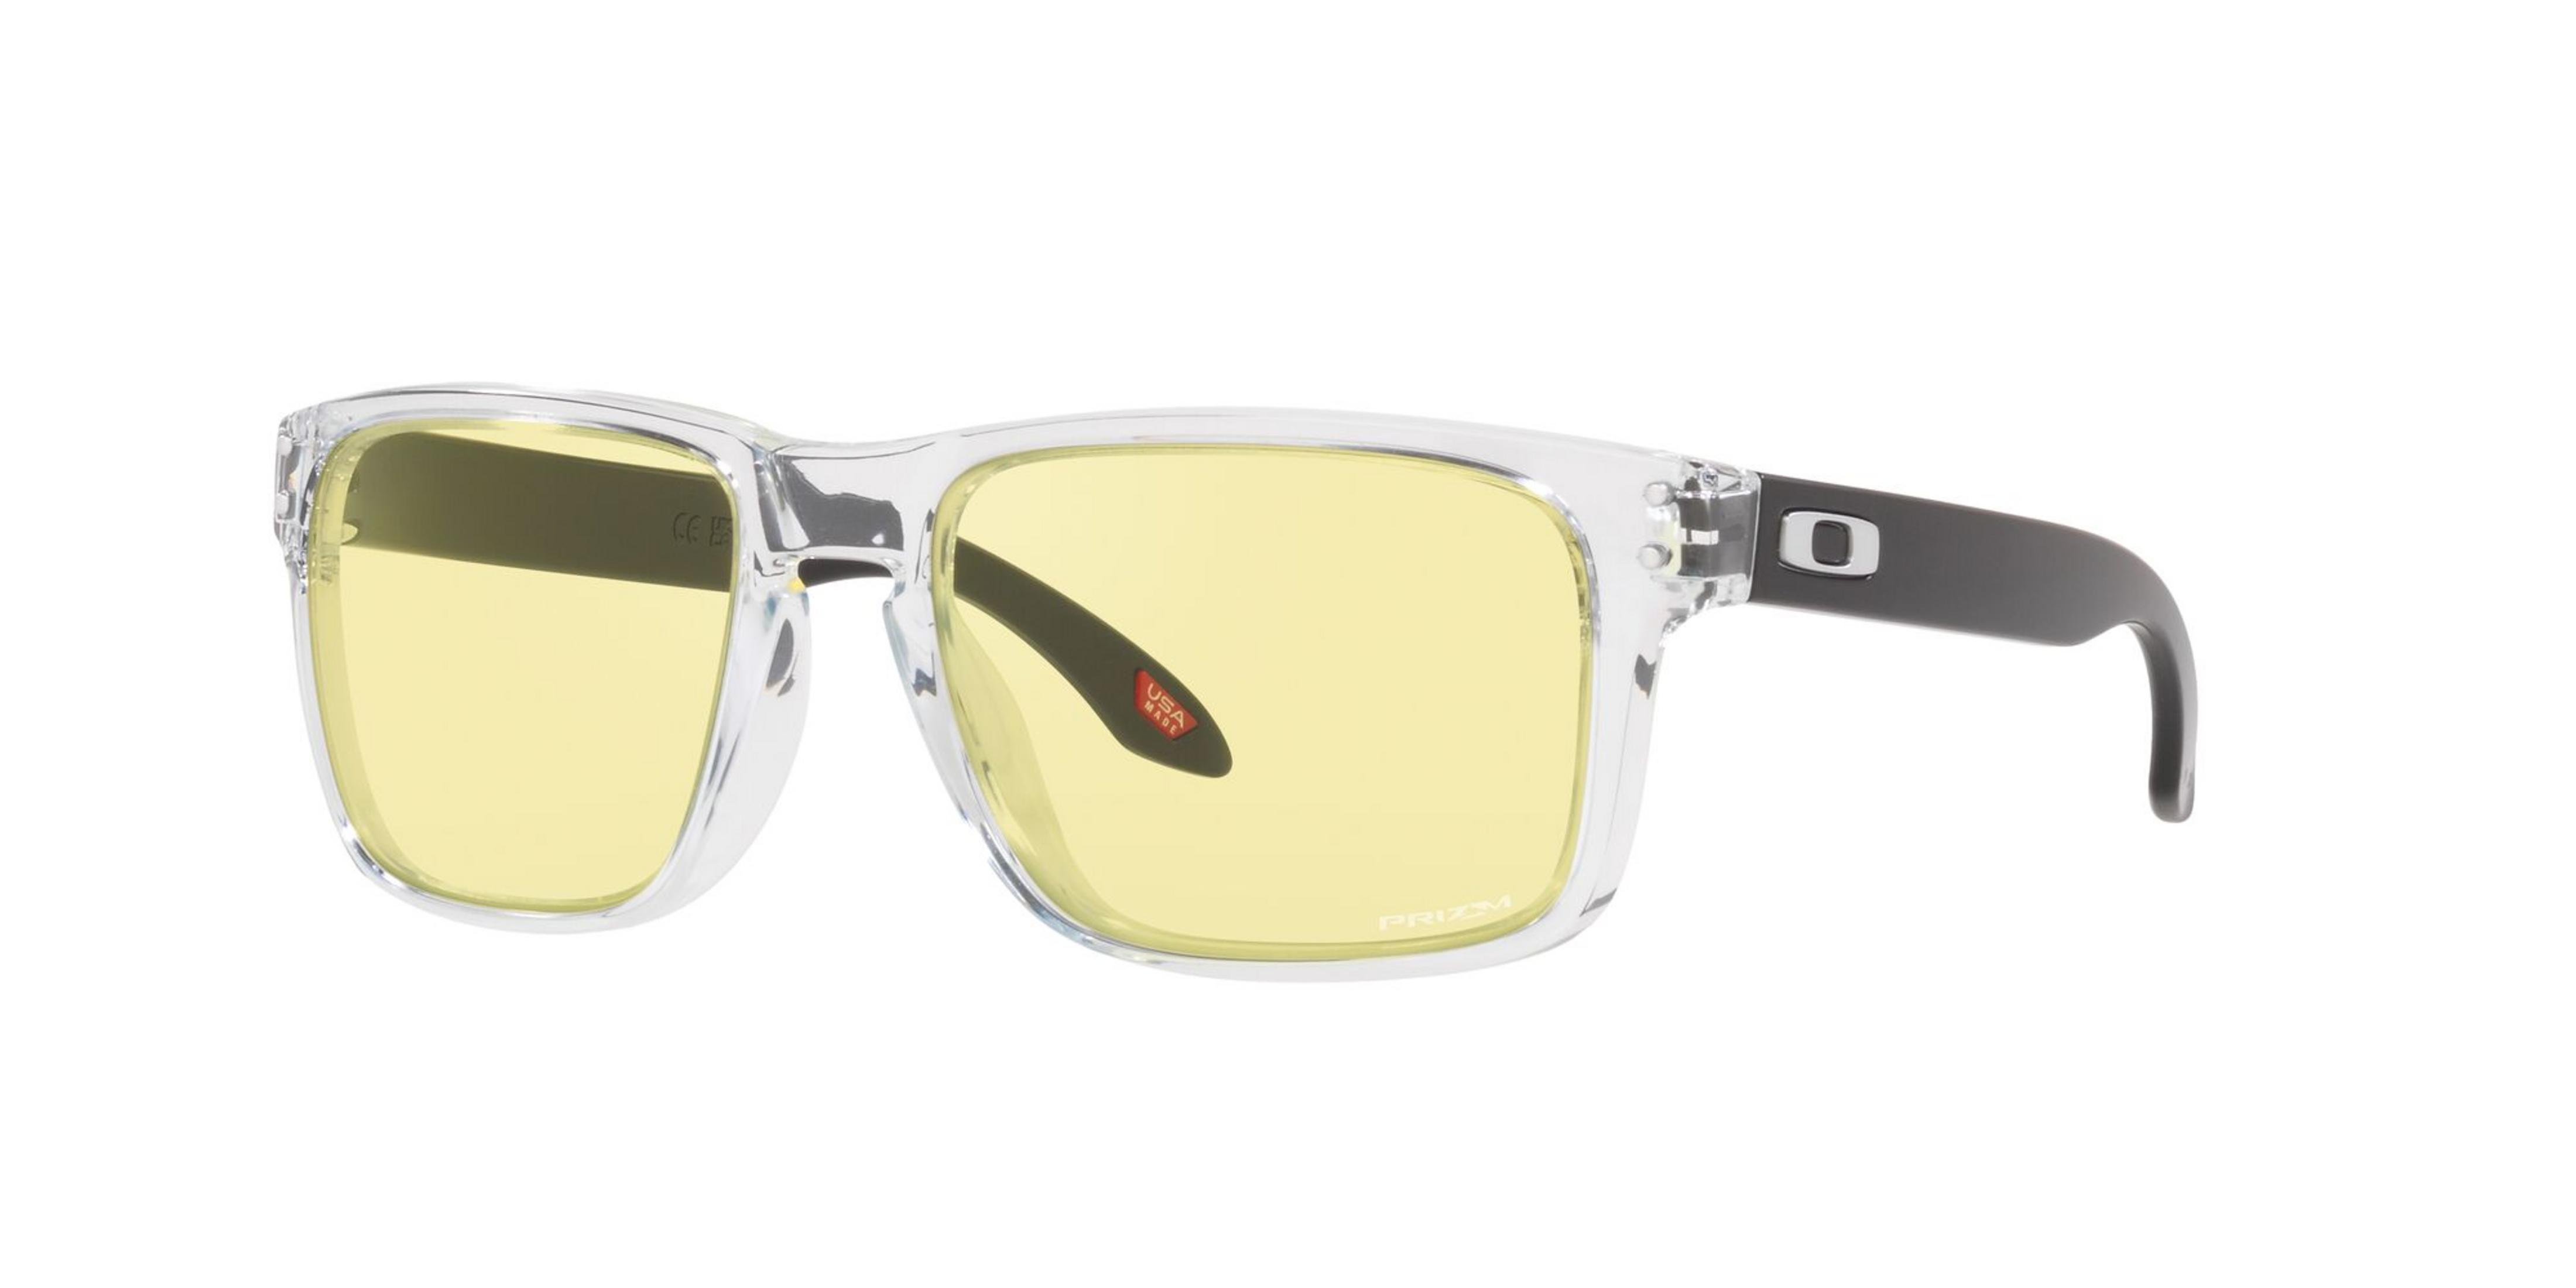 HOLBROOK GAMING, Brille, PRIZM OO9102-X2 OAKLEY W/ CLEAR Gaming Transparent